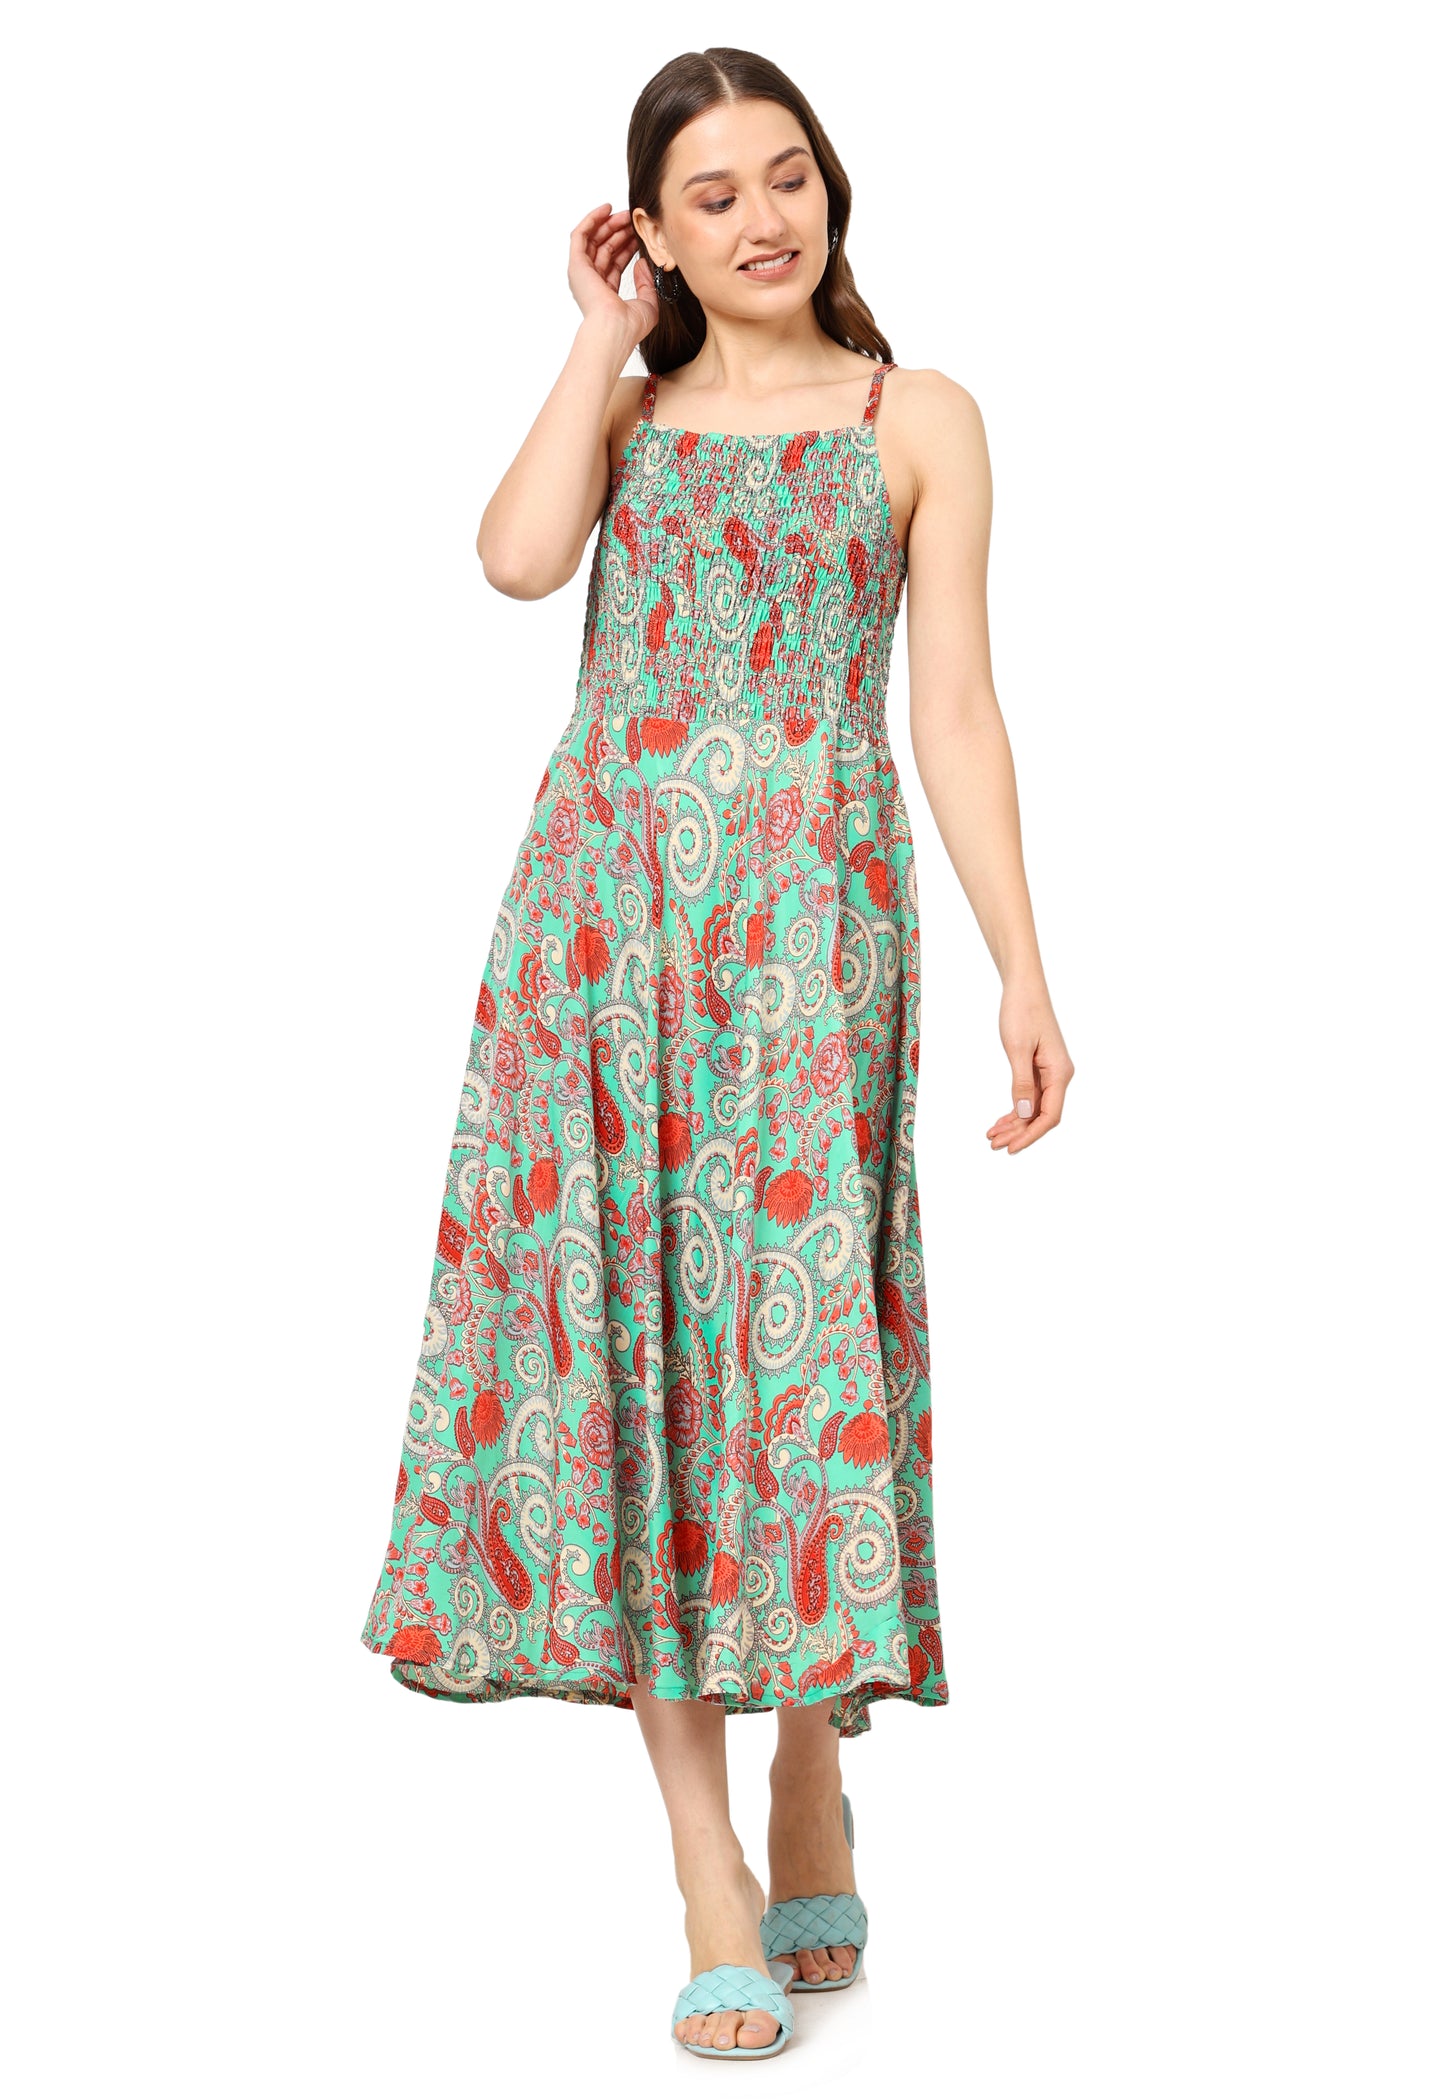 Yash Gallery Women's Green Floral Smoking Embroidered Flared Dress (Green)